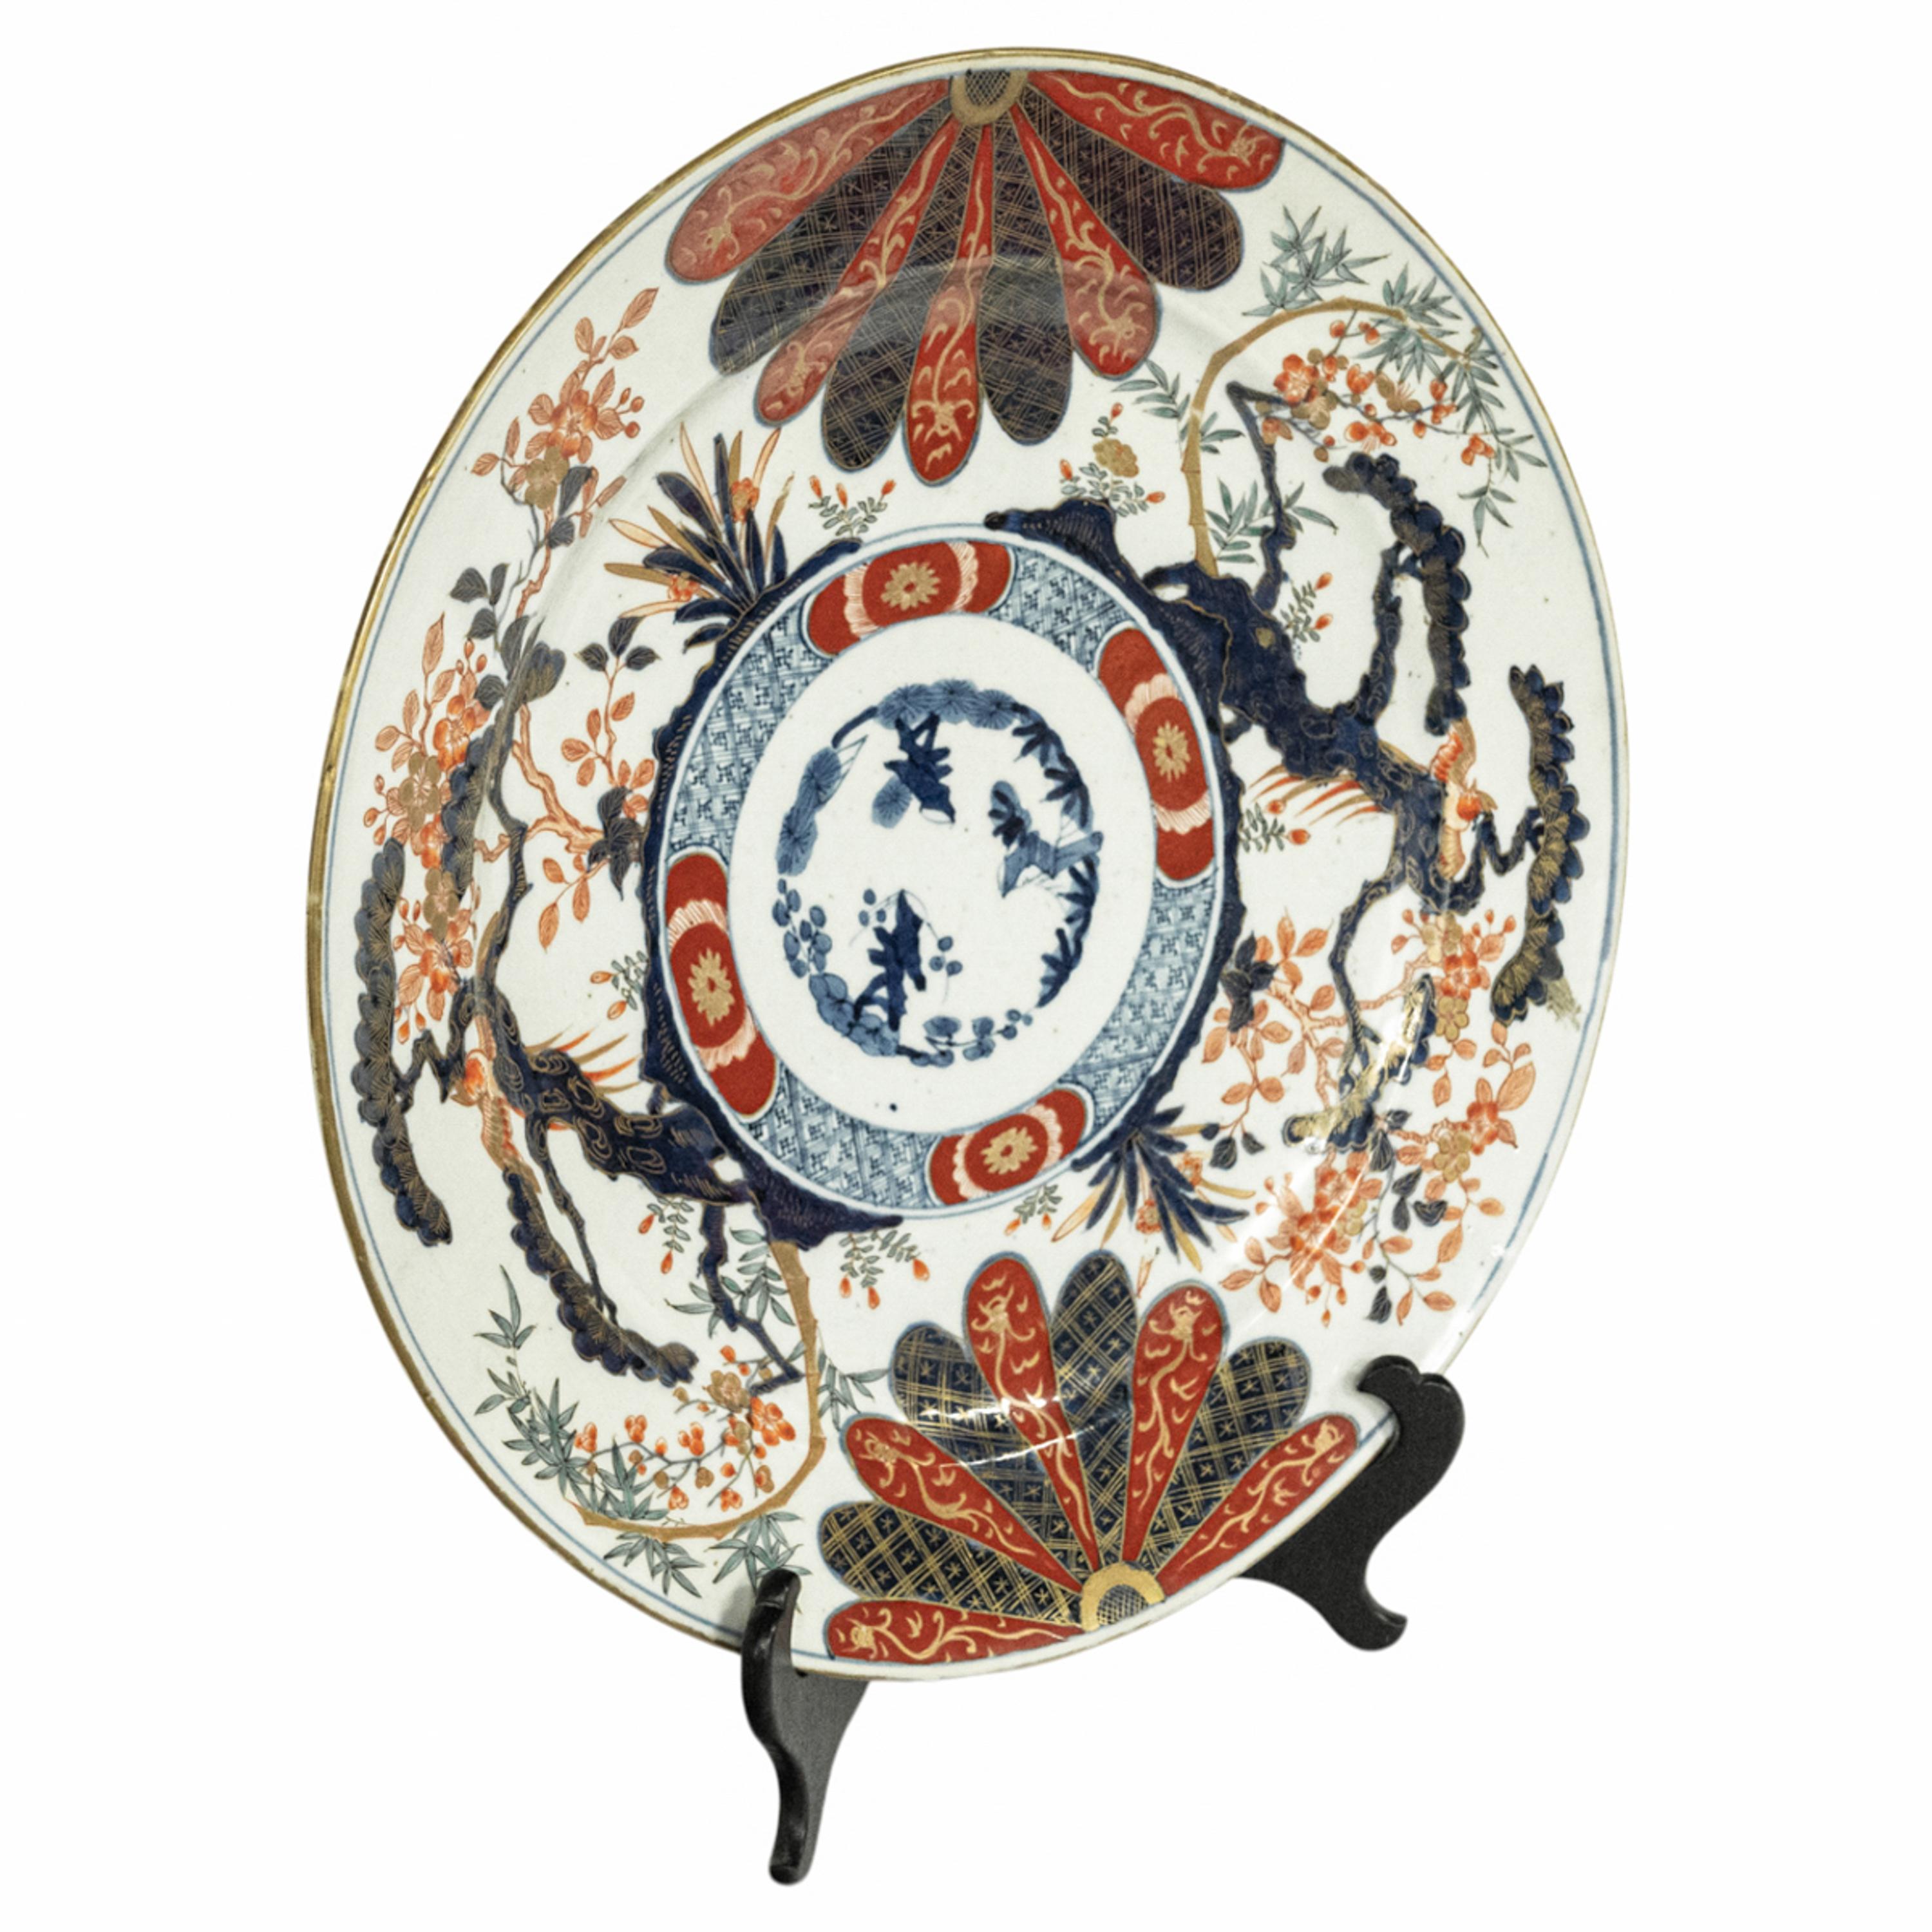 Monumental Antique Japanese Meiji Period Imari Porcelain Charger Plate 1880 In Good Condition For Sale In Portland, OR